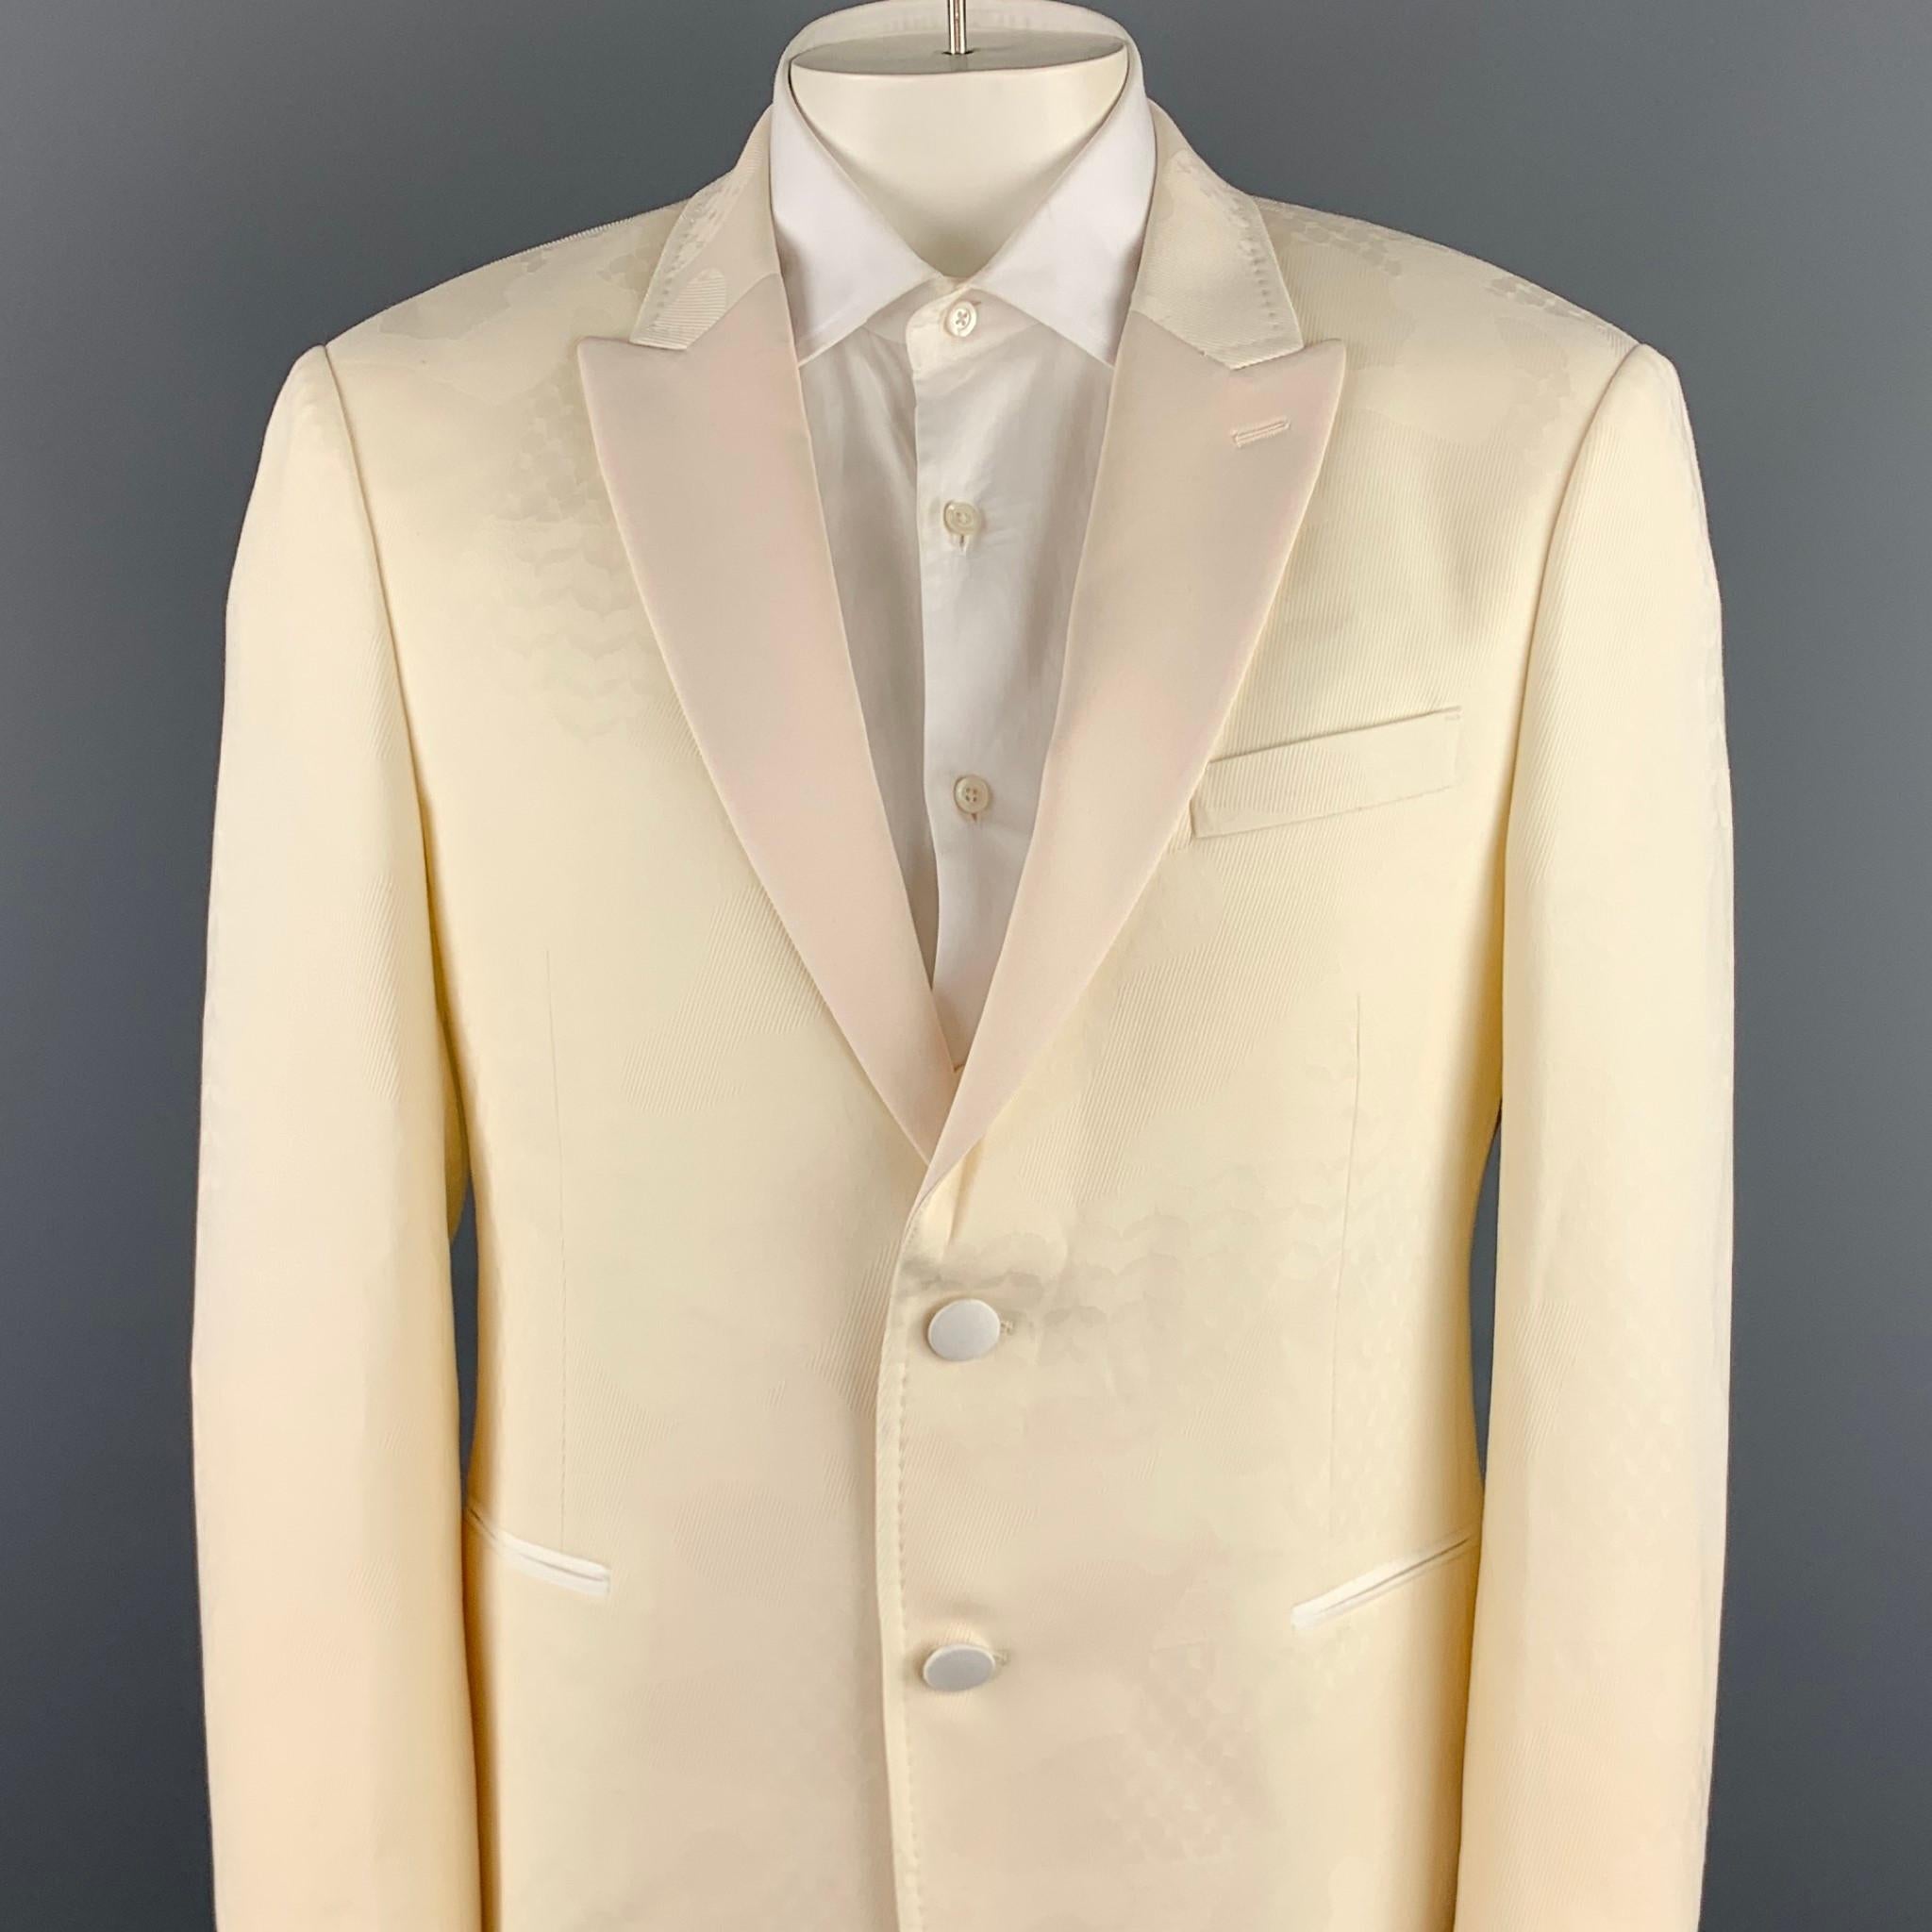 NEIL BARRETT sport coat comes in a cream jacquard wool / elastane with a full liner featuring a peak lapel, flap pockets, and a two button closure. Made in Italy.

New With Tags.
Marked: IT 54
Original Retail Price: